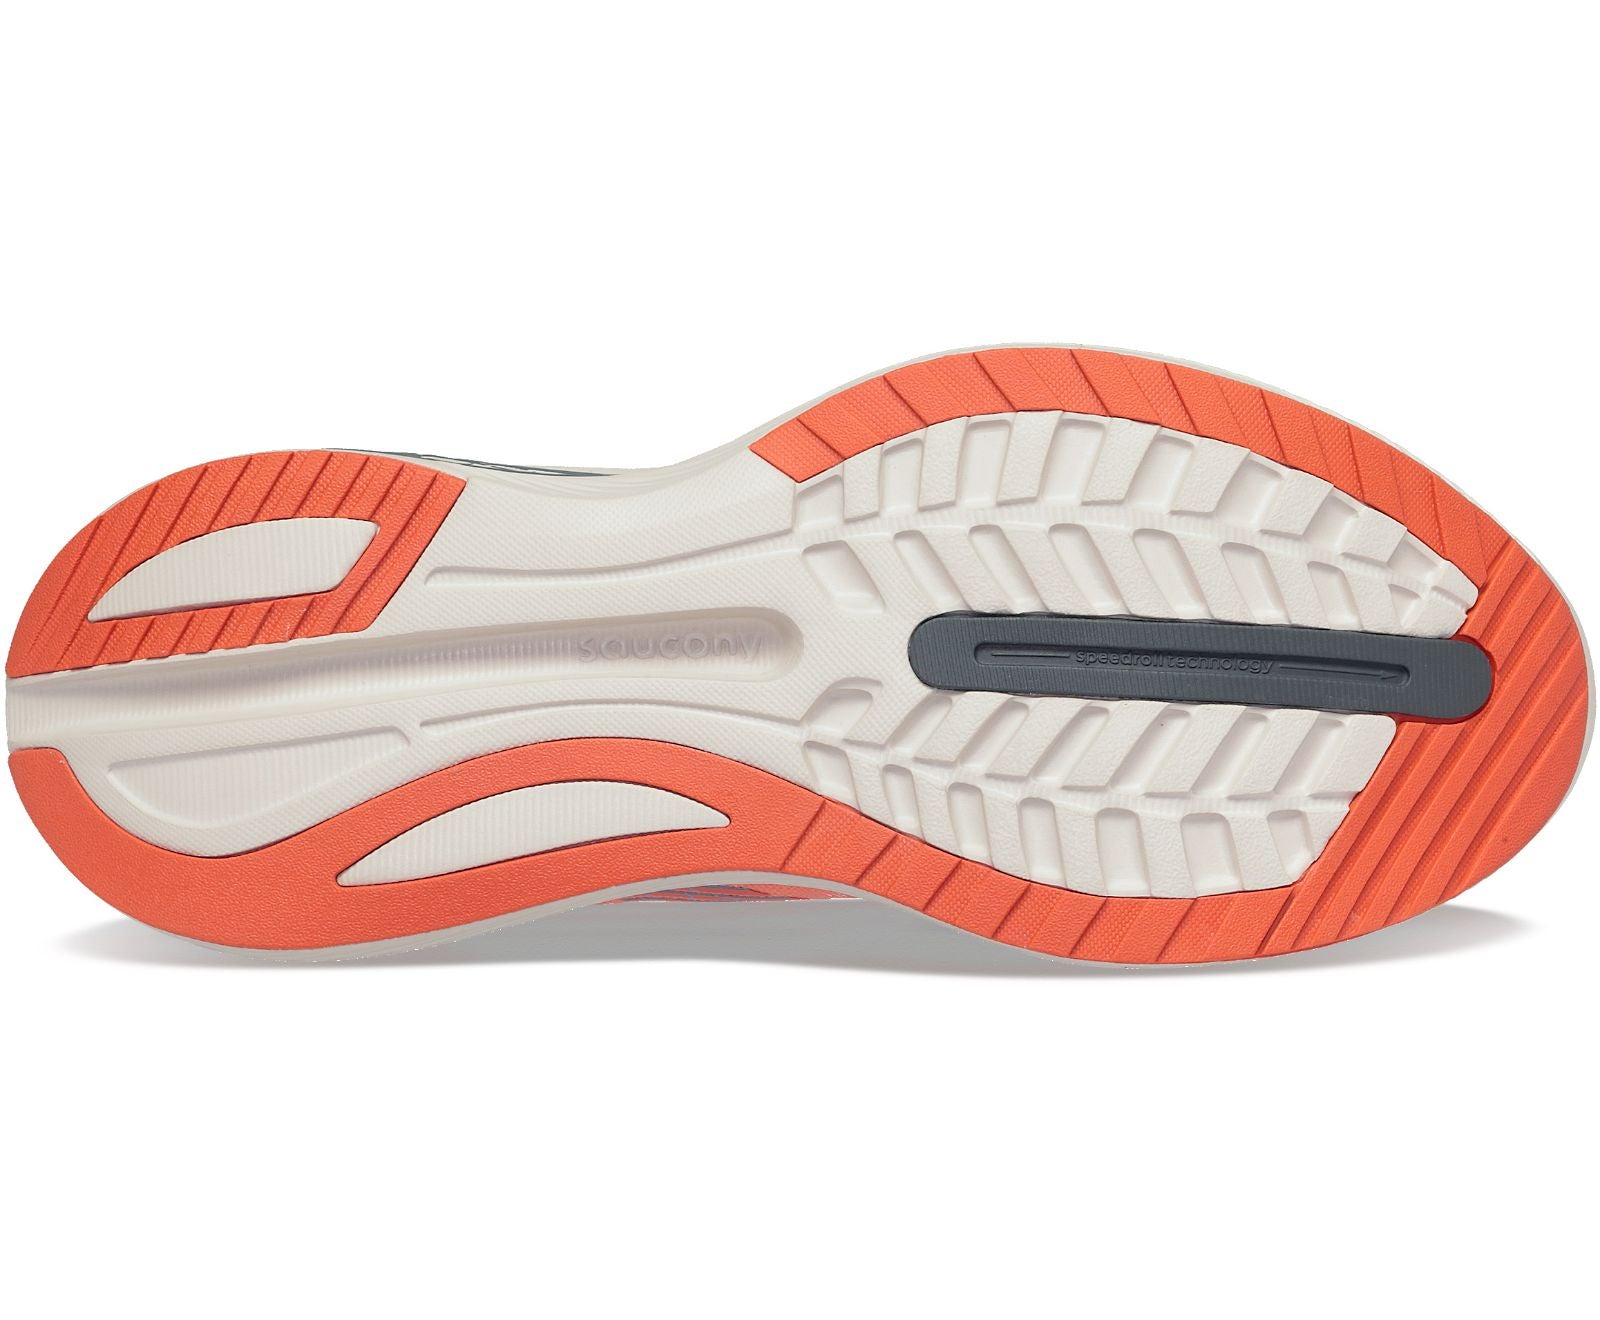 Bottom (outer sole) view of the Women's Endorphin Shift 3 by Saucony in the color Coral/Shadow